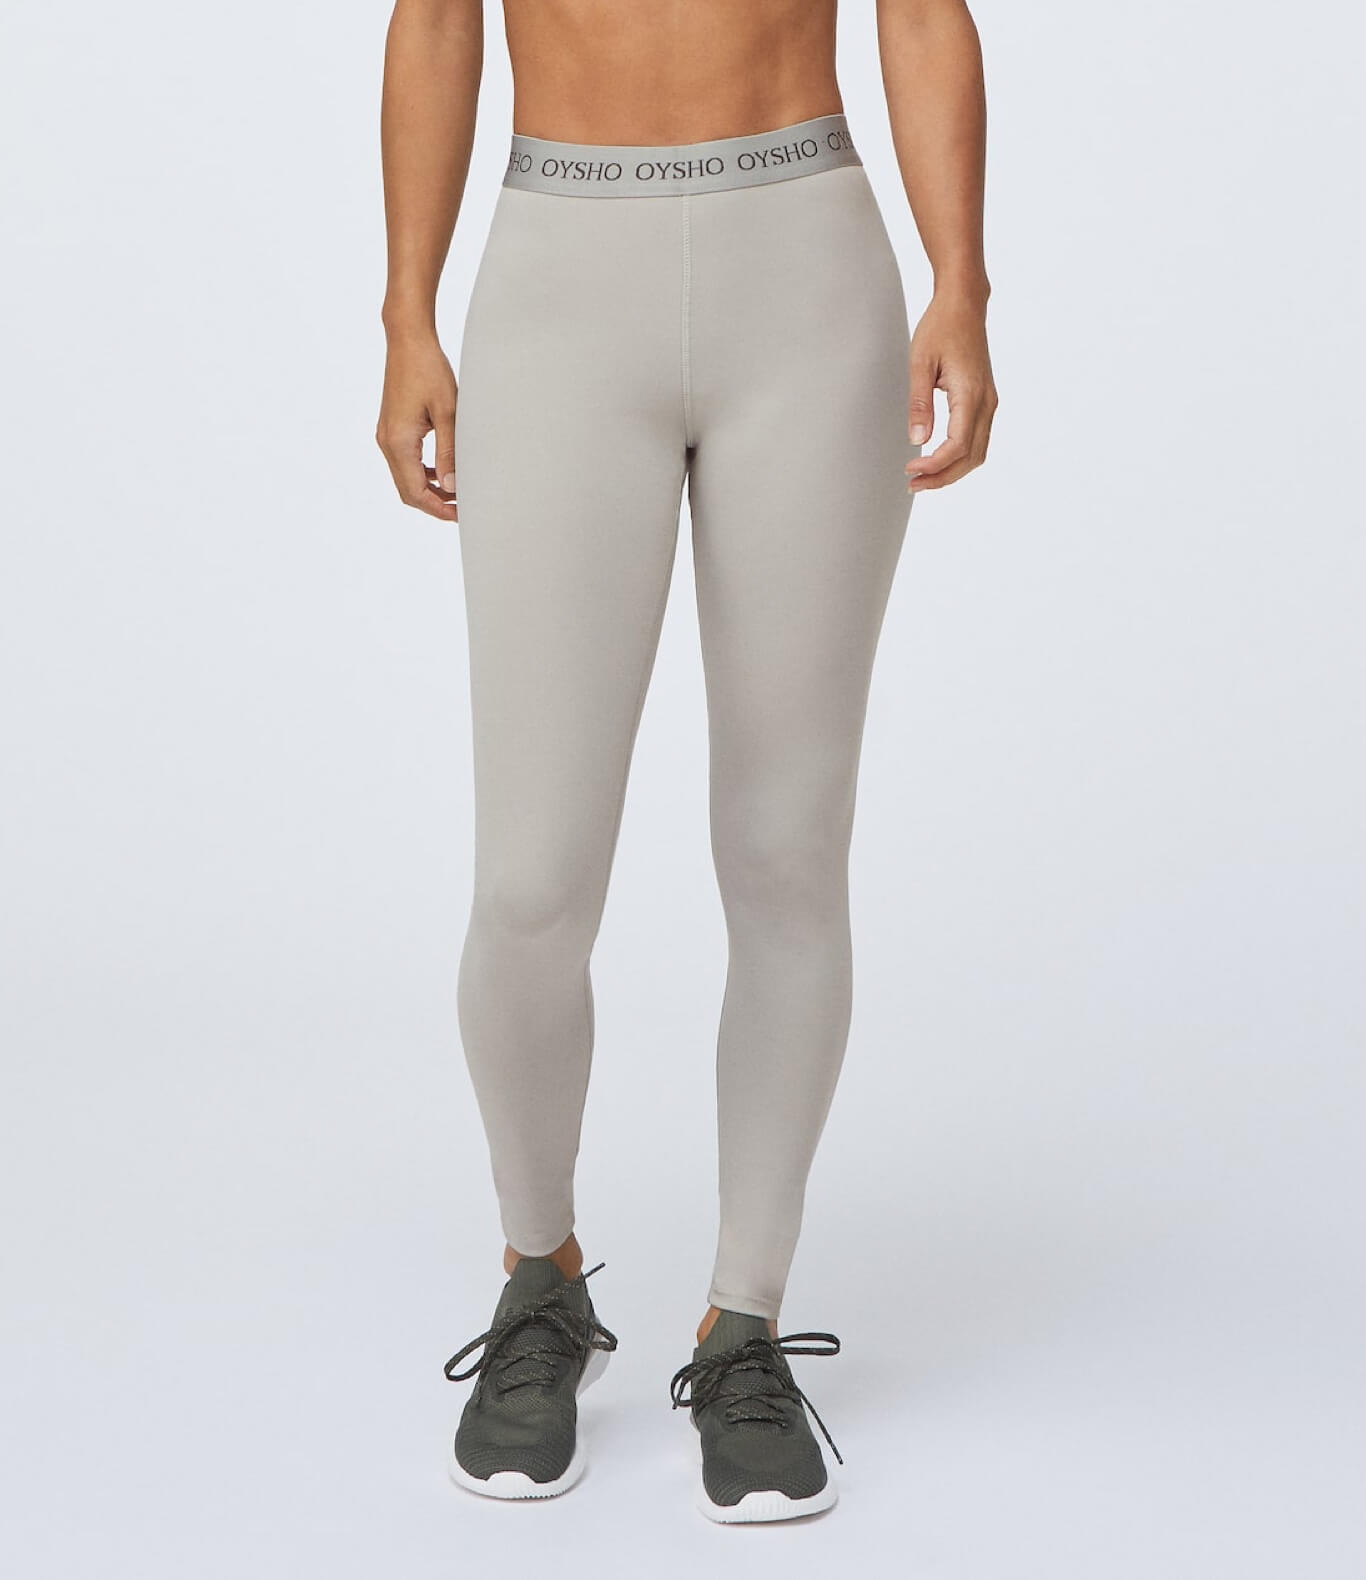 Oysho Compression Leggings Reviewed  International Society of Precision  Agriculture